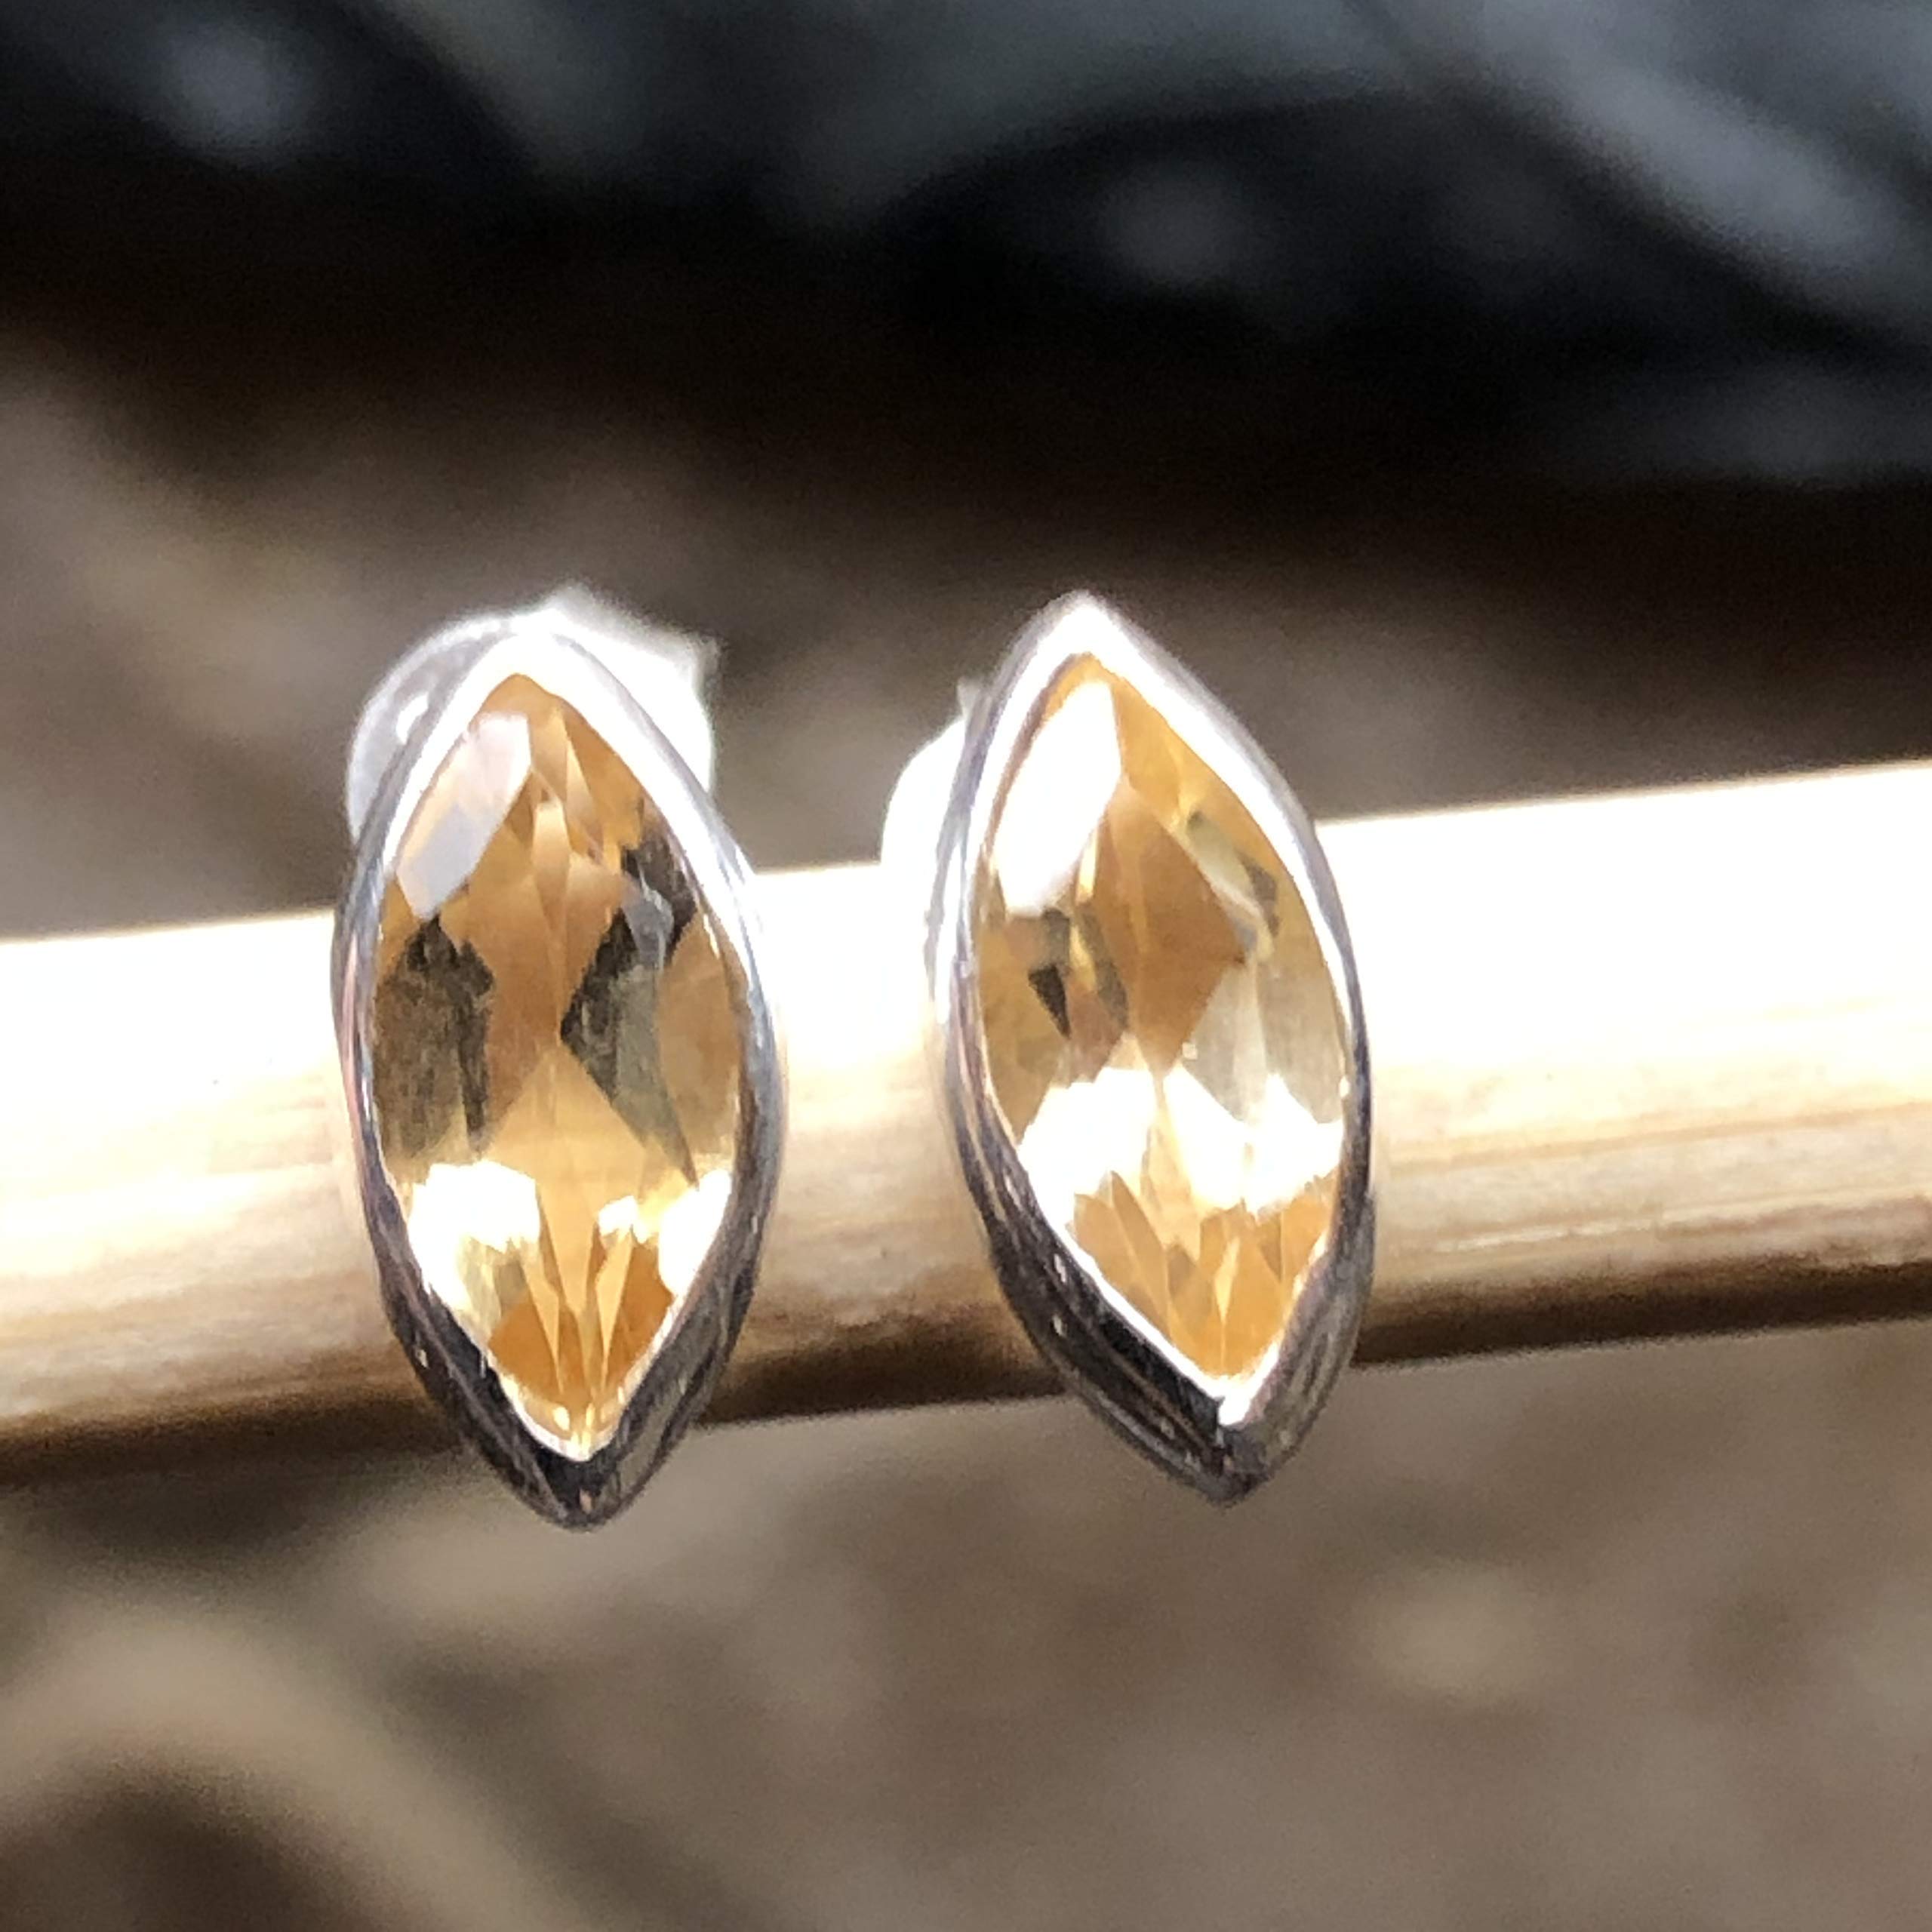 Genuine 2ct Golden Citrine 925 Solid Sterling Silver Earrings 7mm